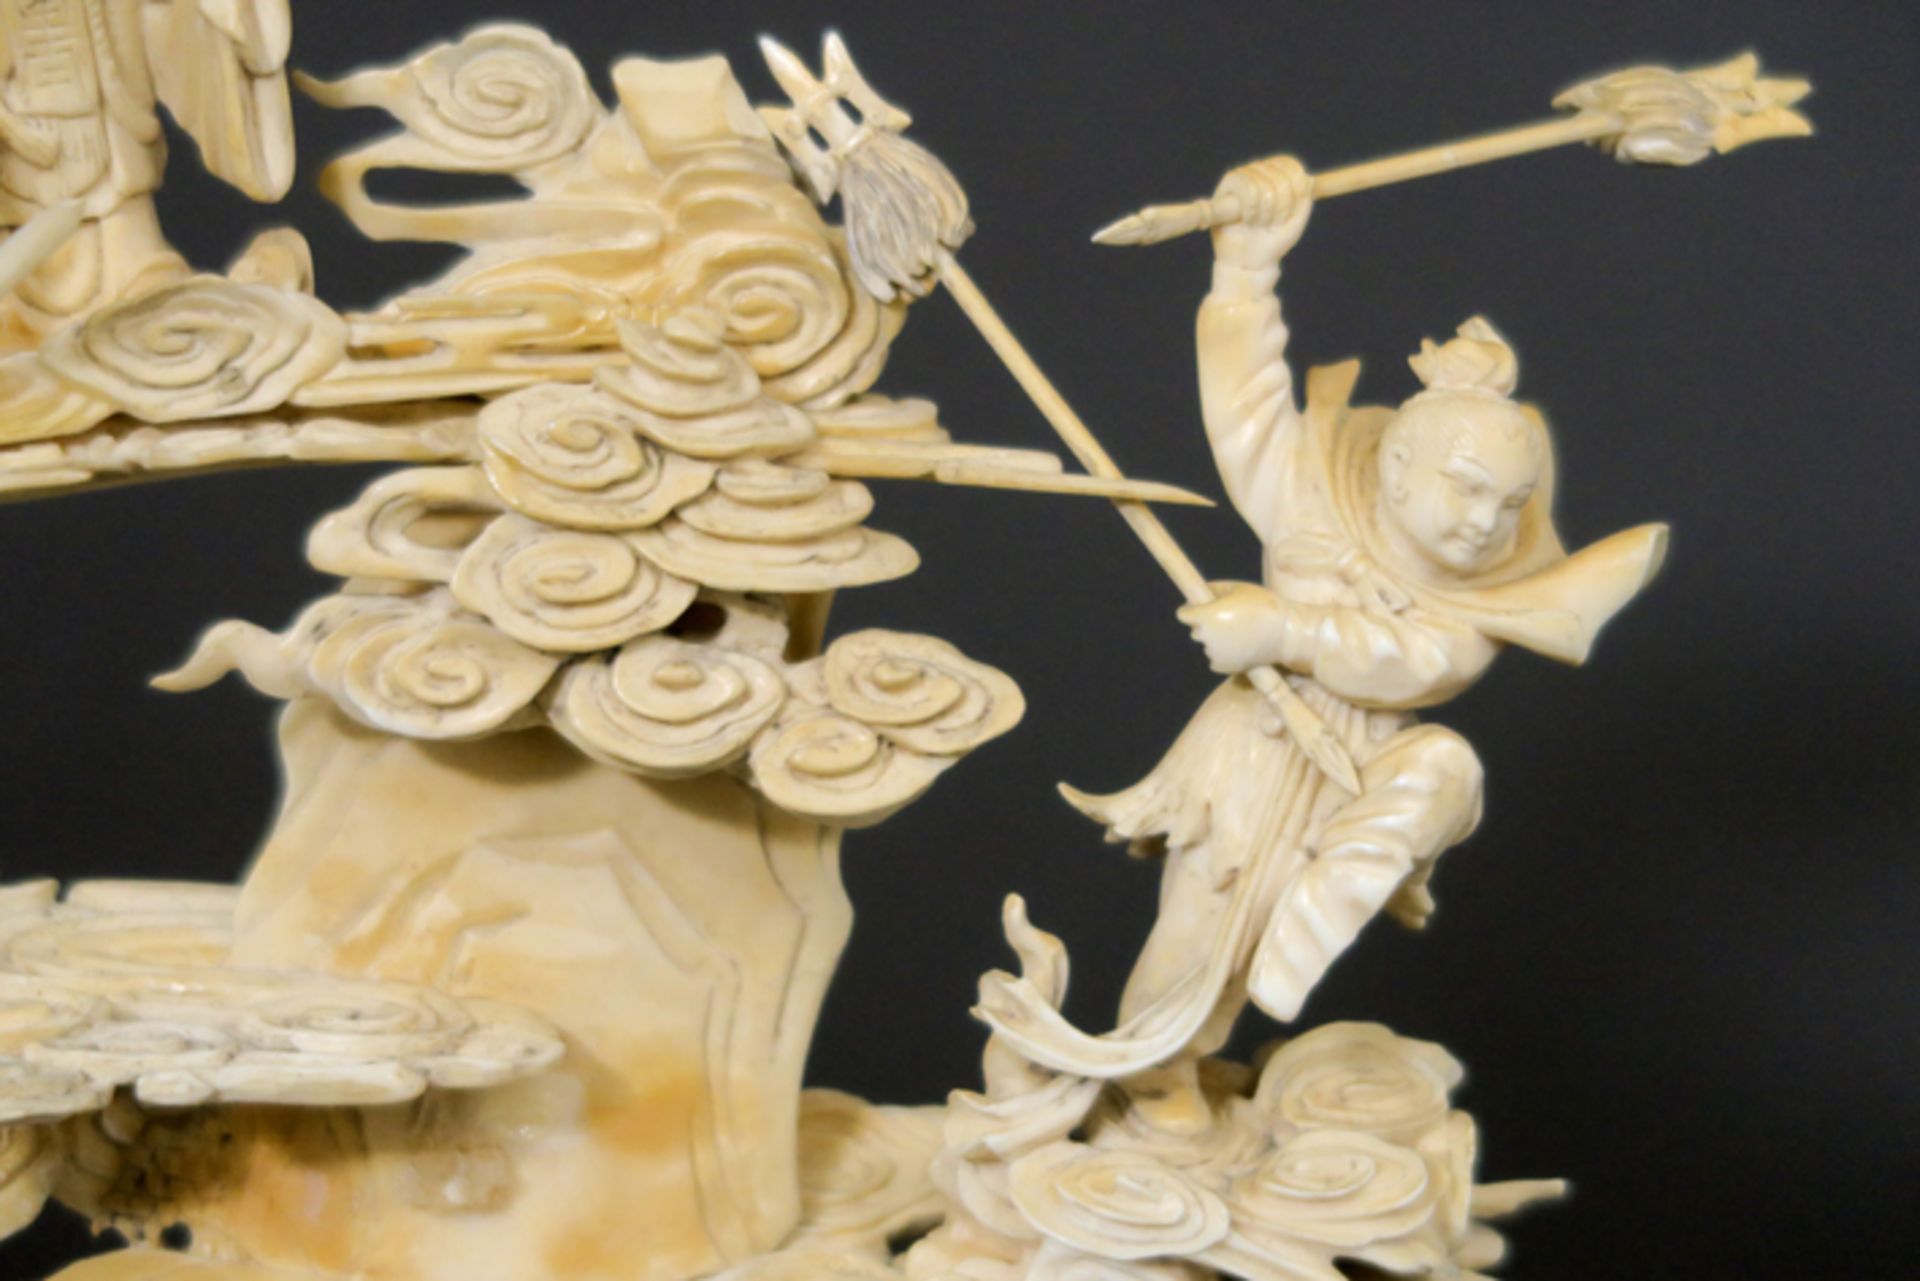 19th Cent. Chinese "Sage with three figures in the clouds" sculpture in ivory - - [...] - Image 5 of 6